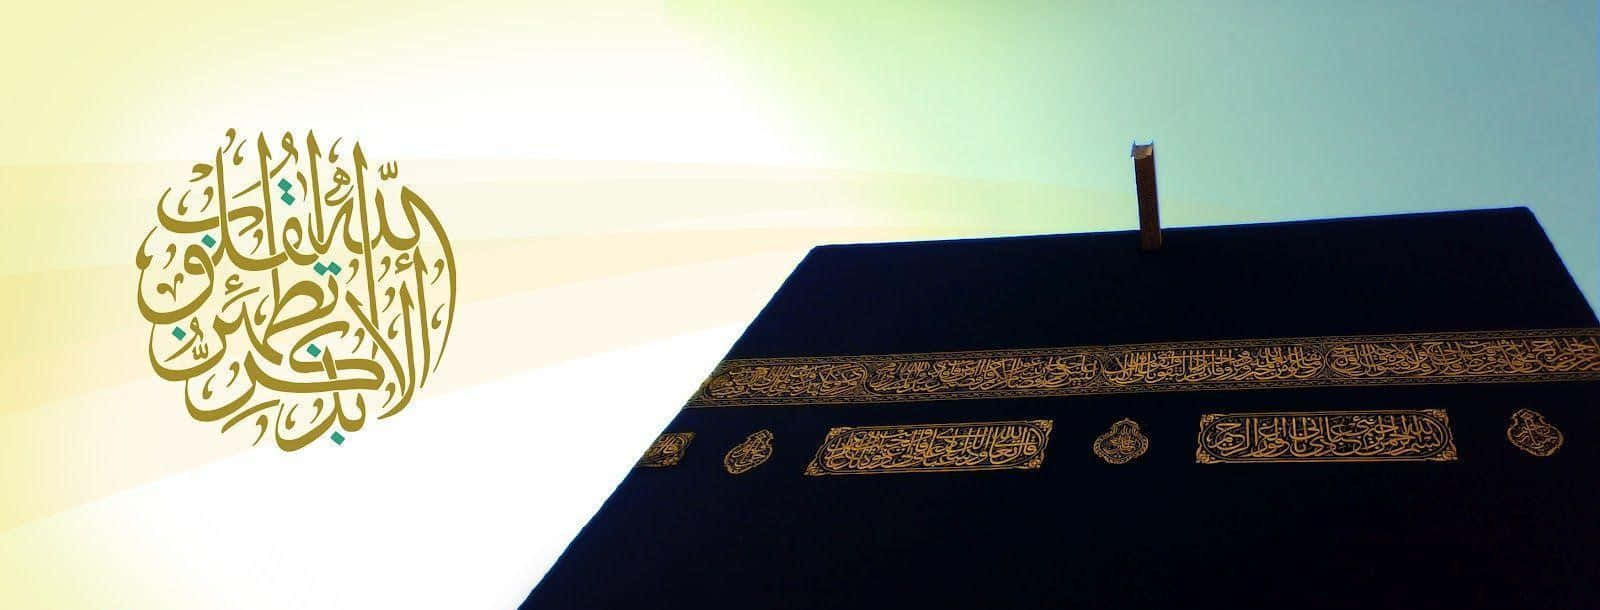 A Black Kaaba With Arabic Writing On It